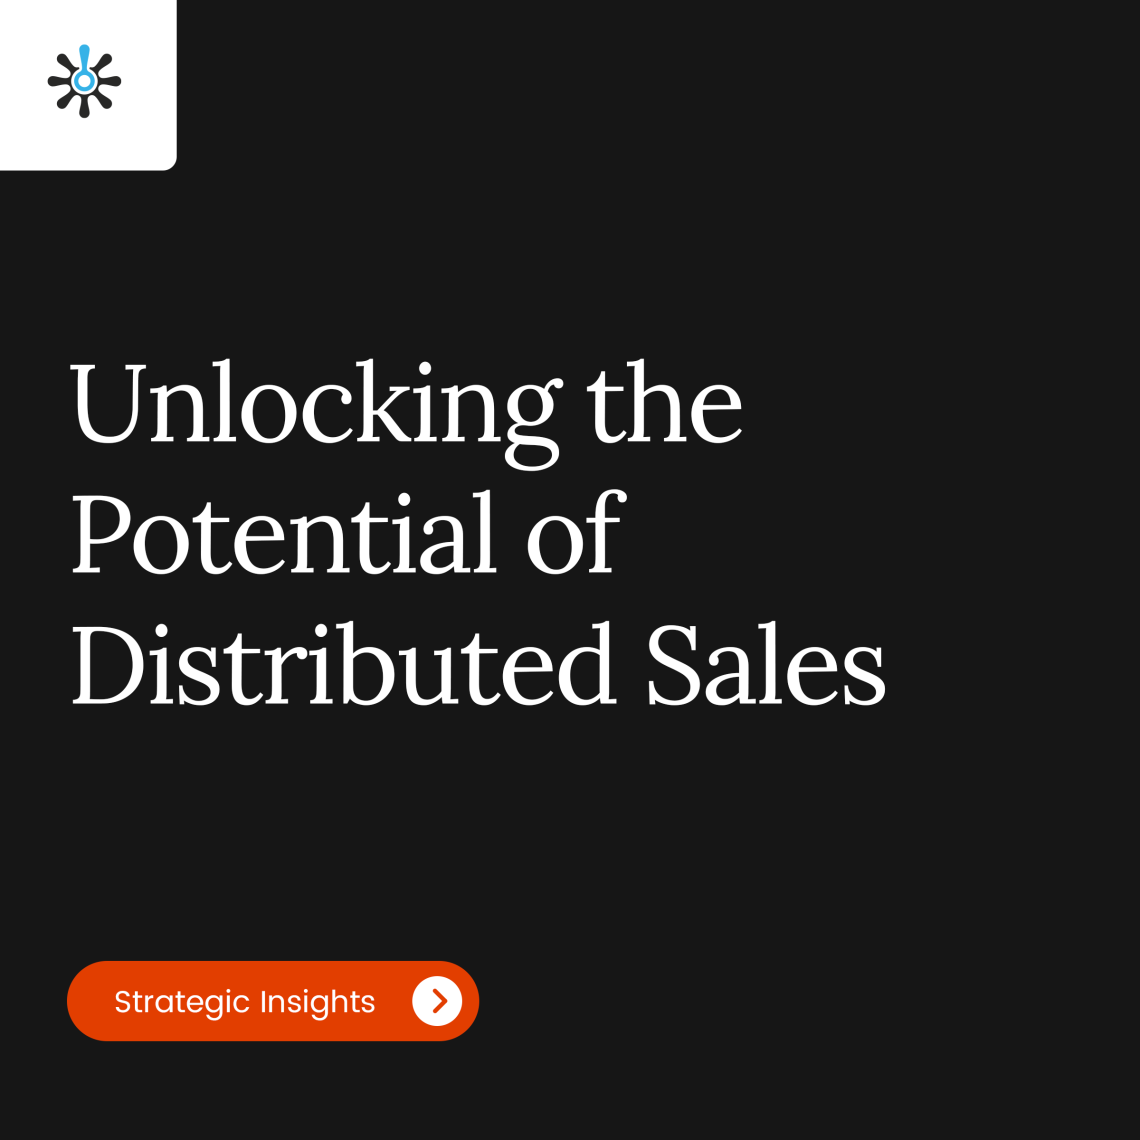 Title Page Reading "Unlocking the Potential of Distributed Sales"